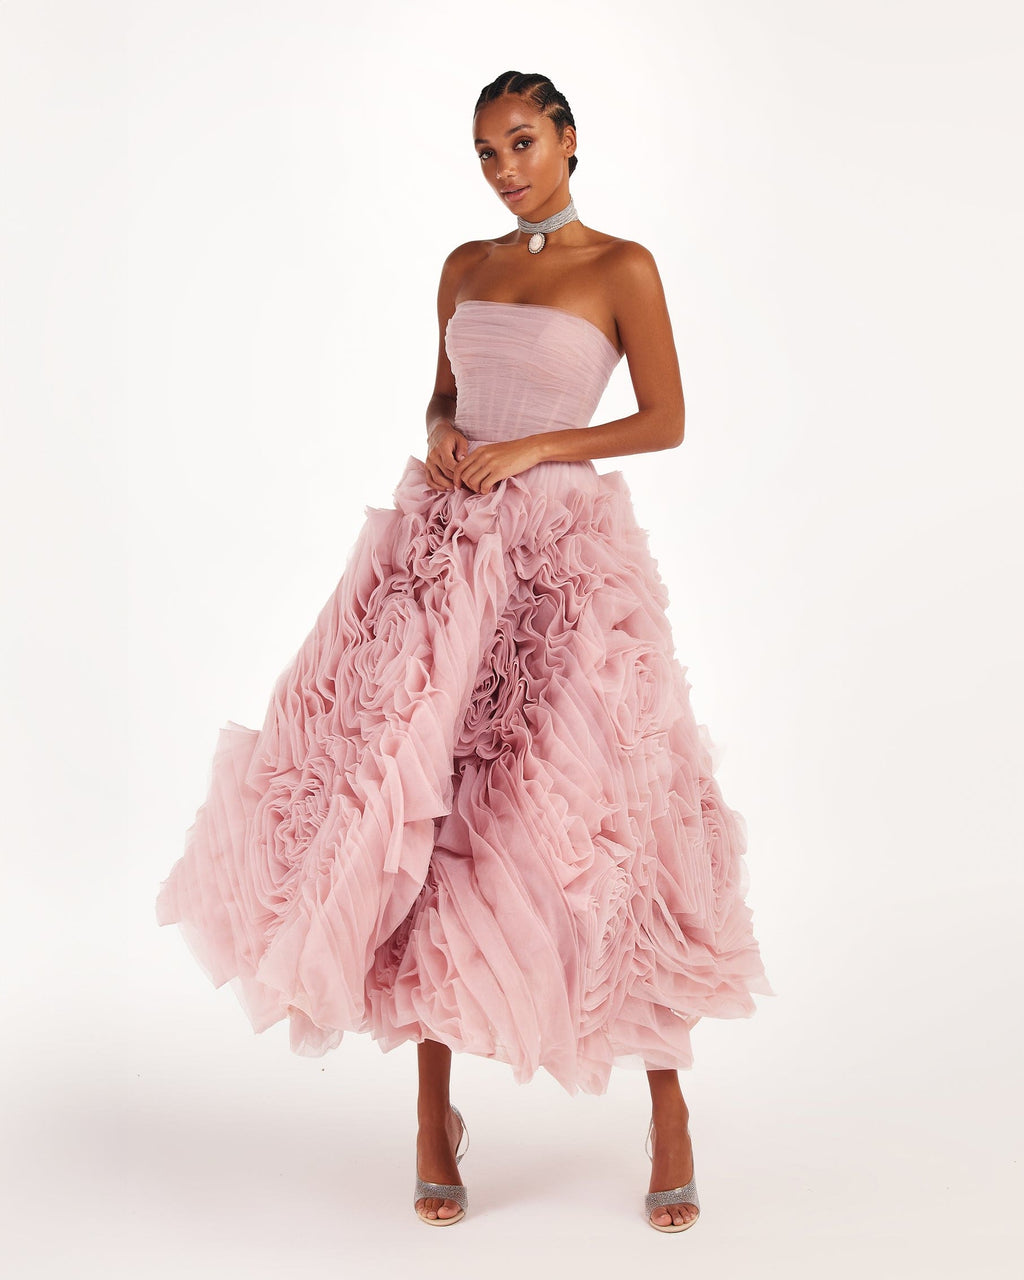 Dramatically flowered tulle dress in misty pink